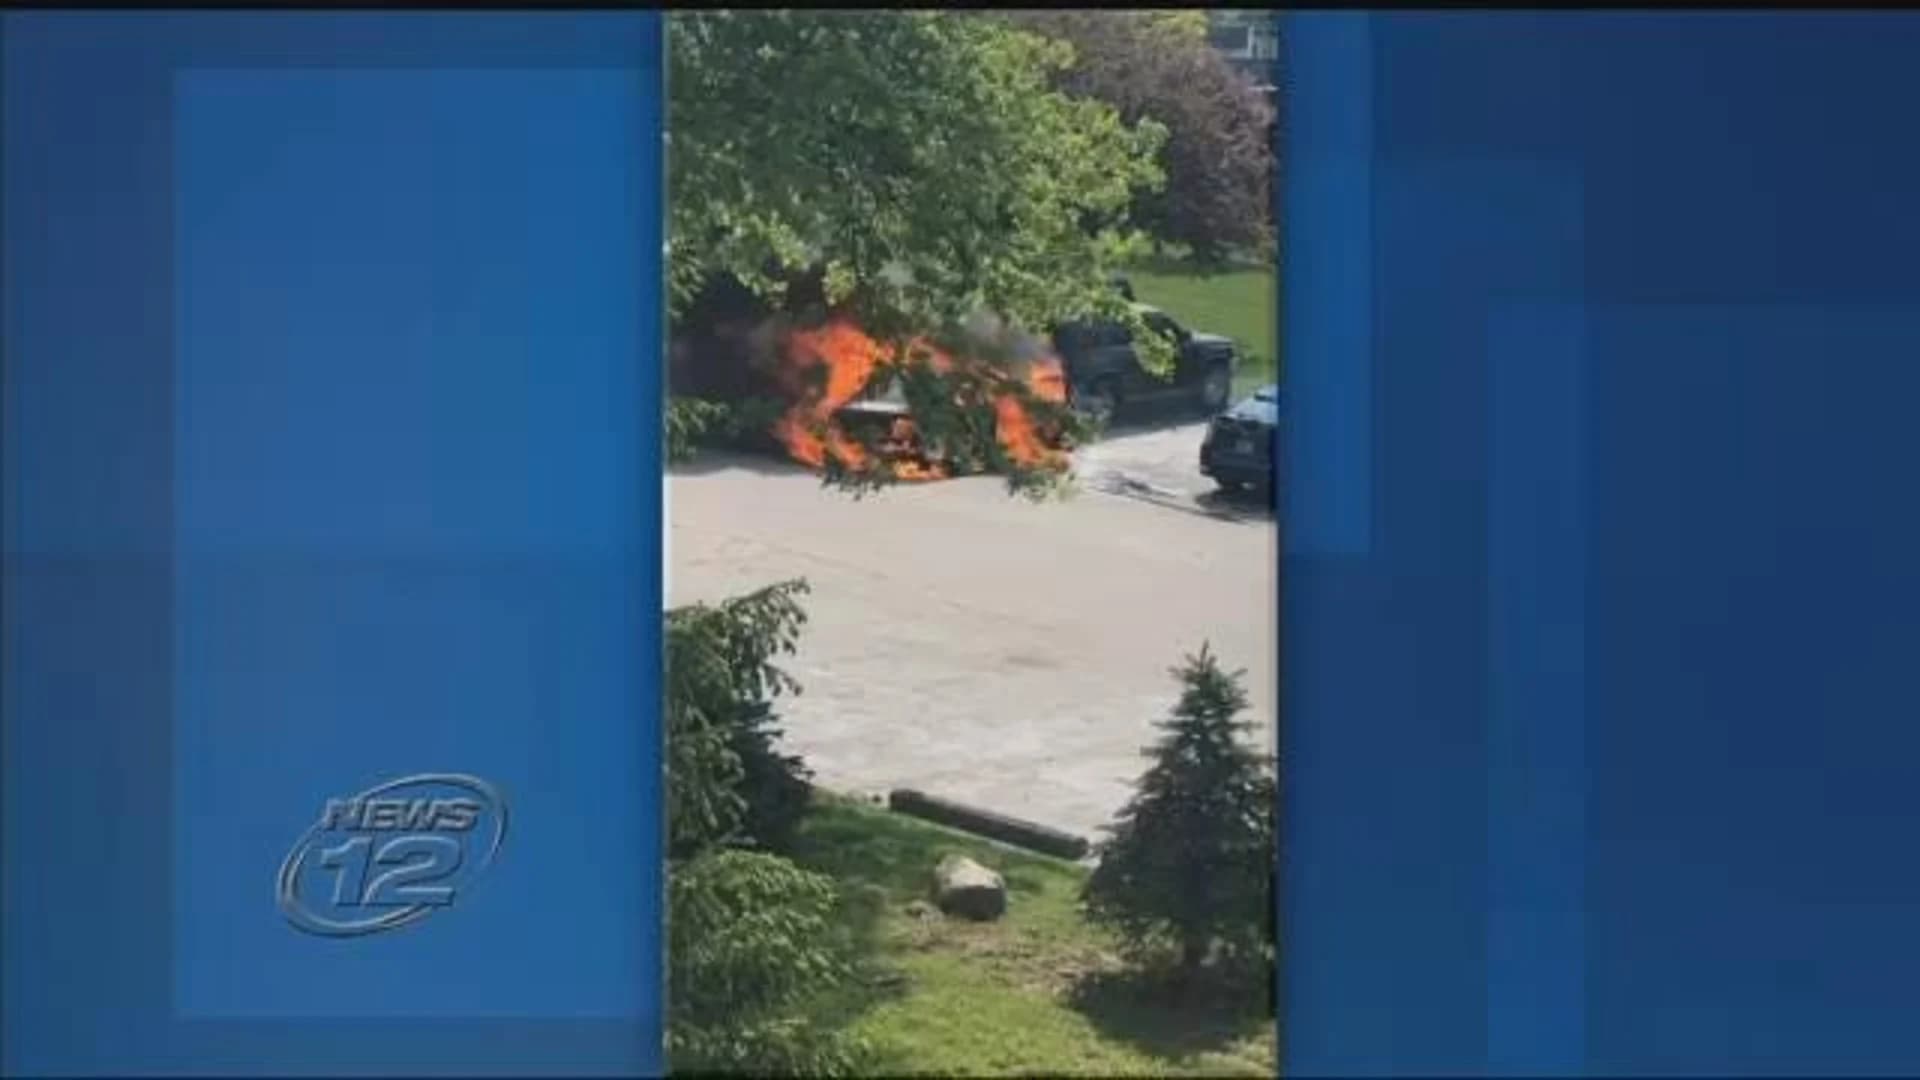 1 killed in apparent car explosion in Scotchtown